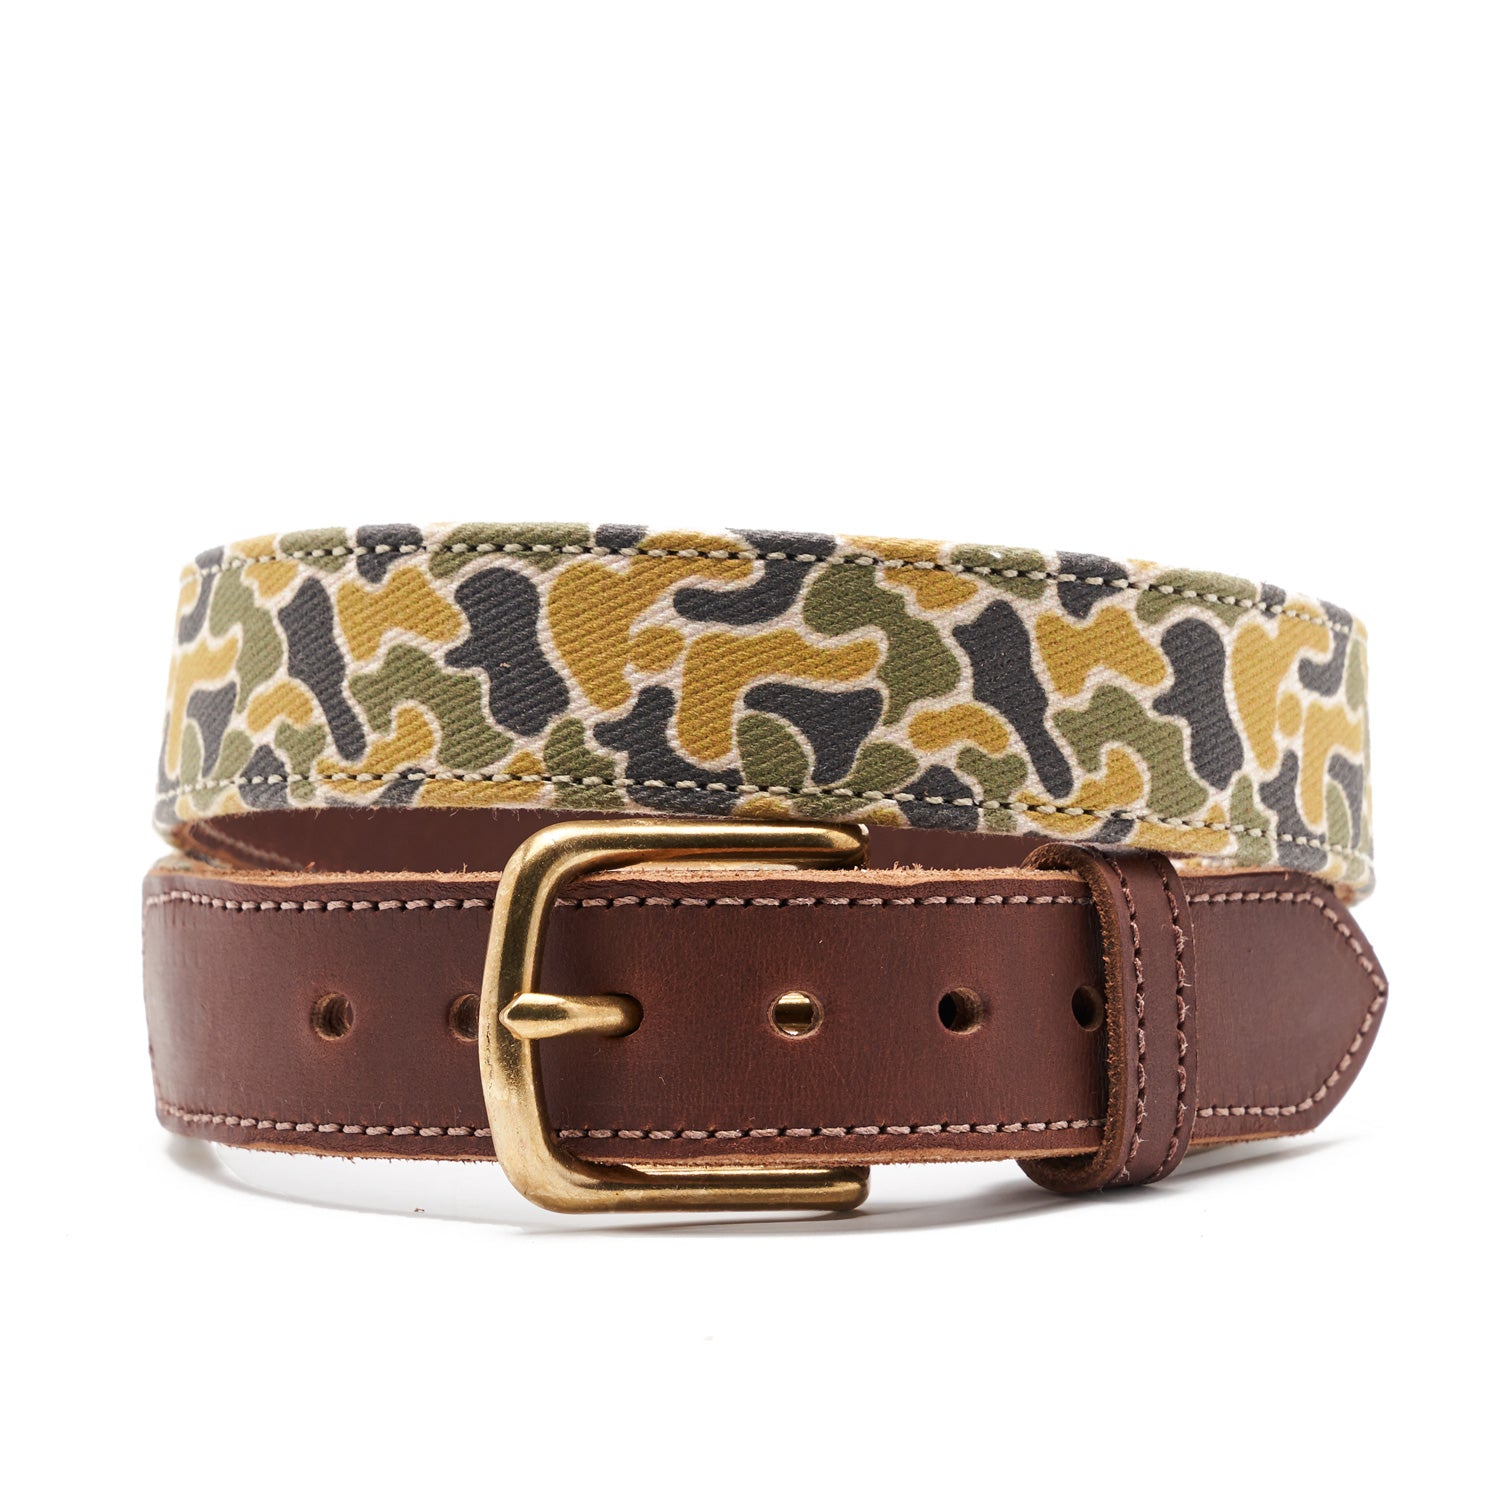 The Oxbow Canvas Belt